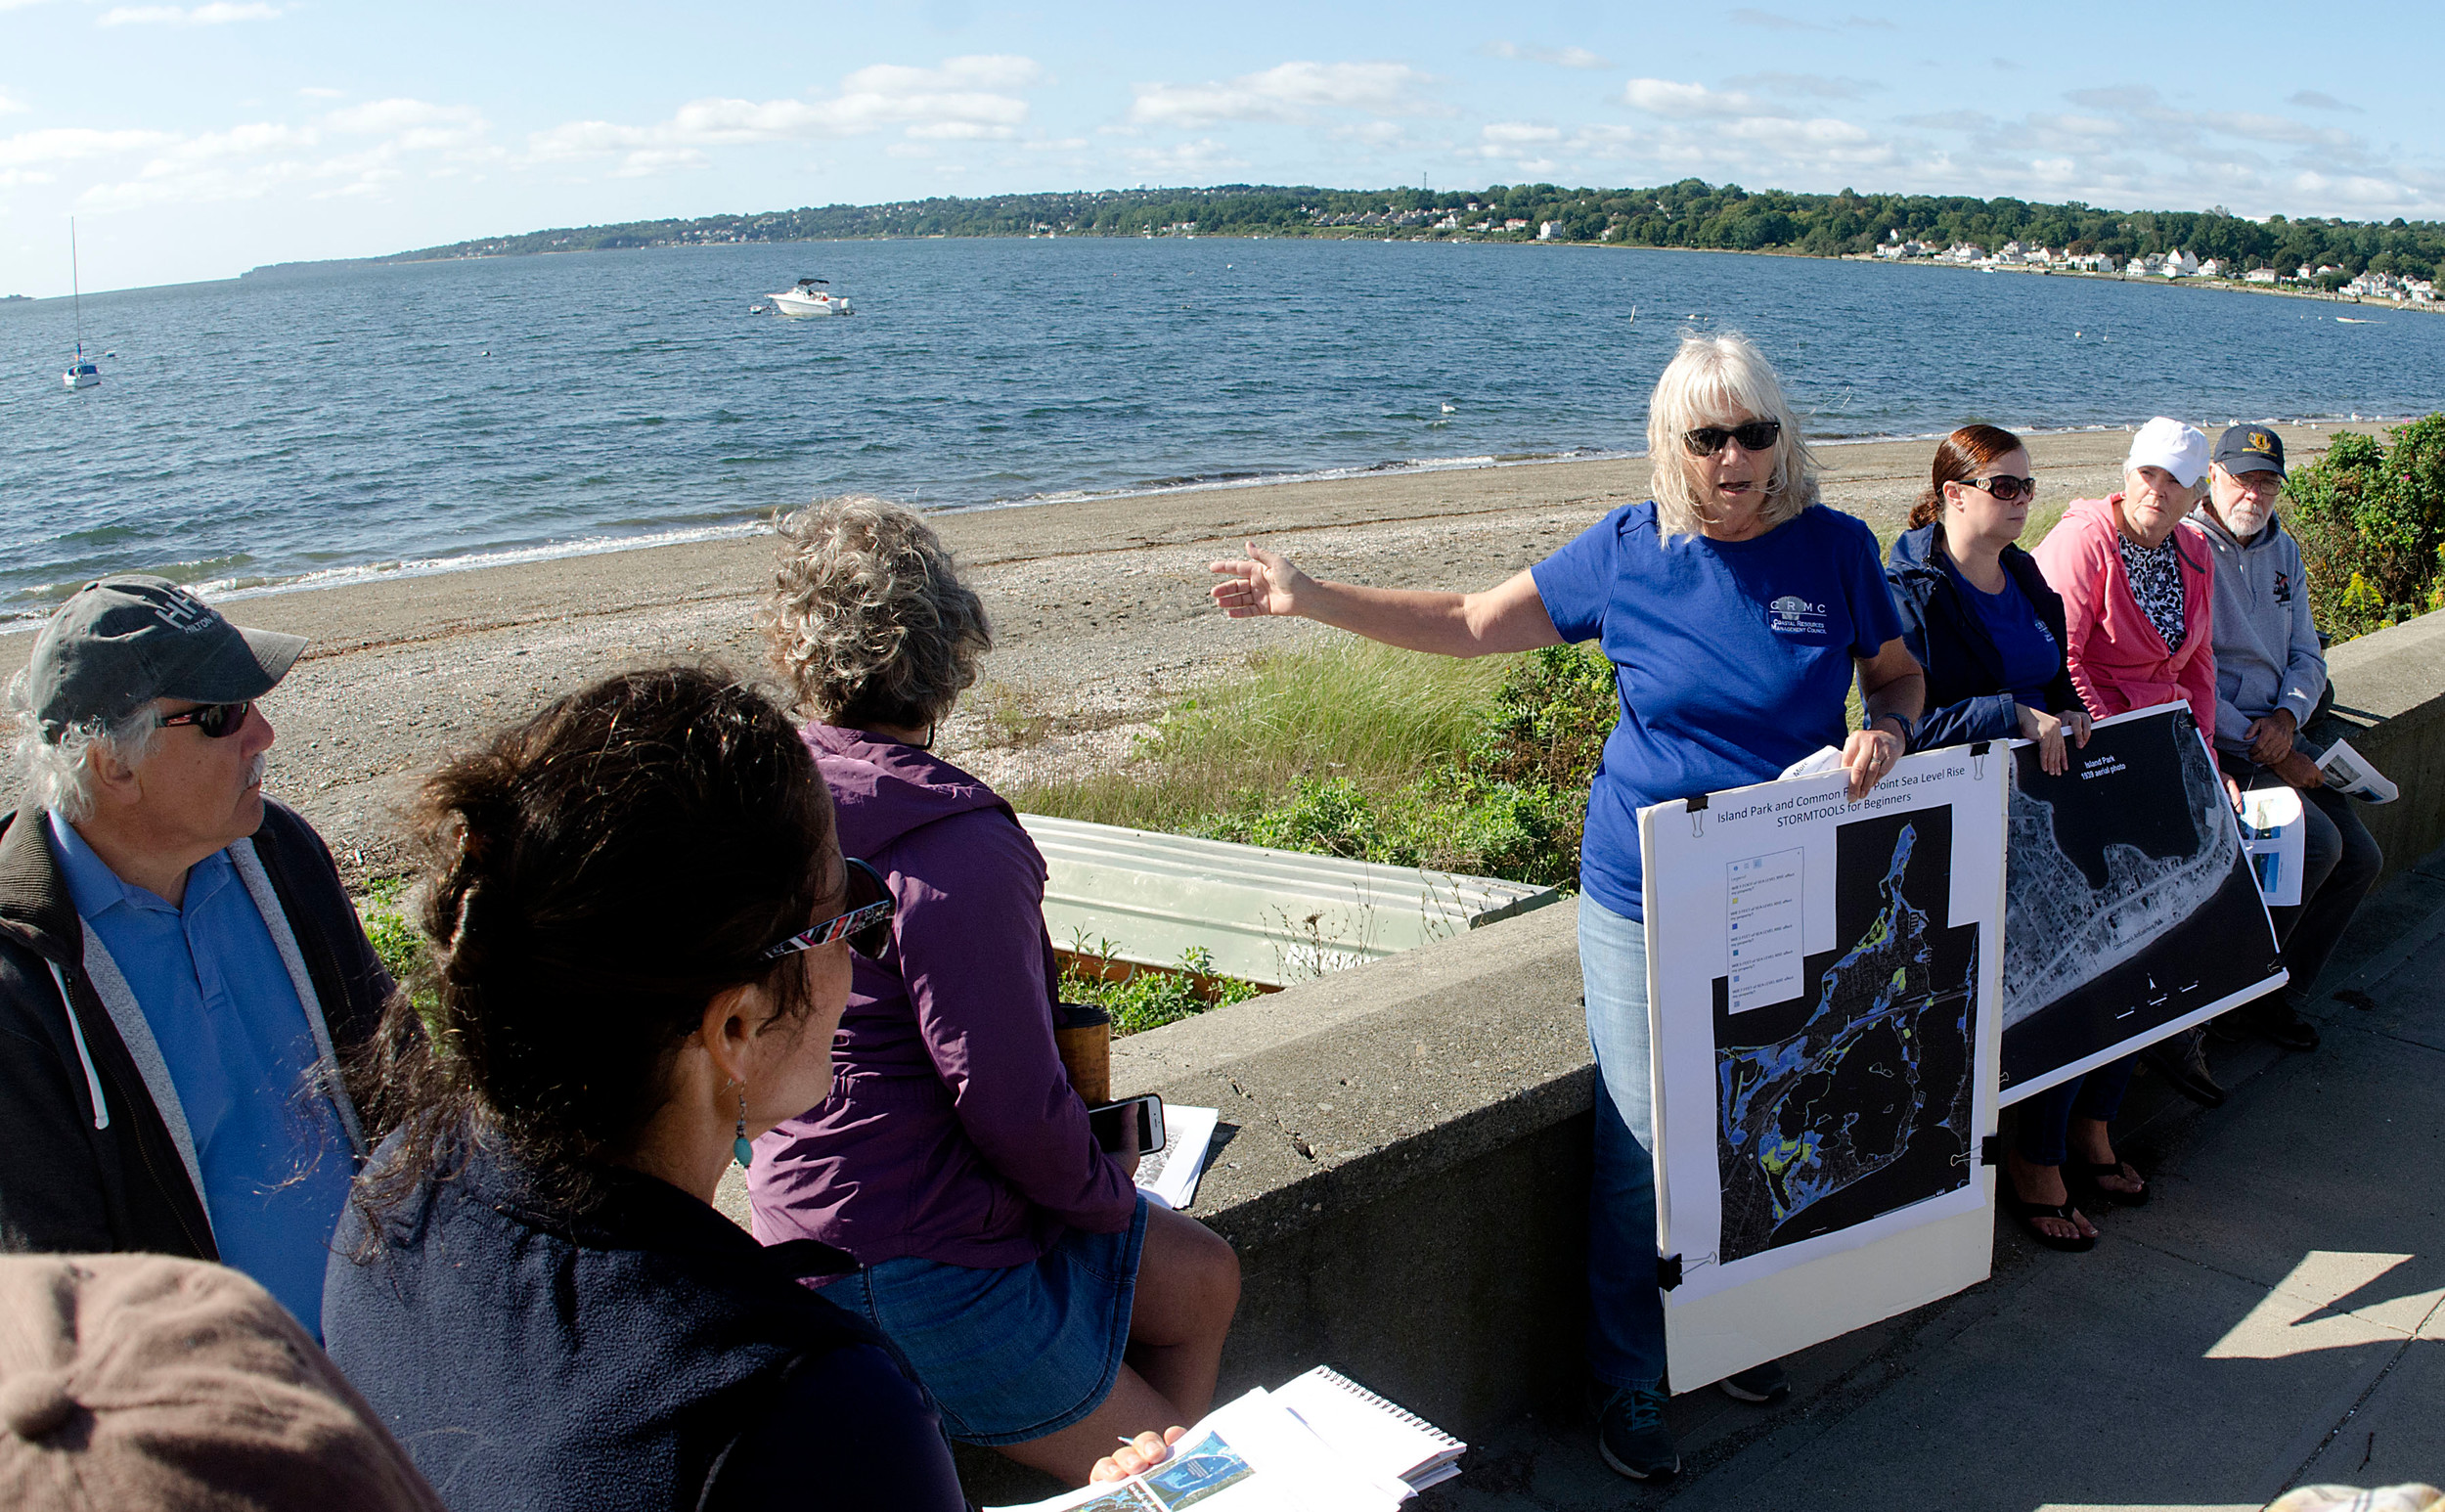 Janet Freedman (middle) and Laura Dywer (right) of CRMC speak about the 1938 Hurricane during an anniversary tour at Island Park on Friday morning.